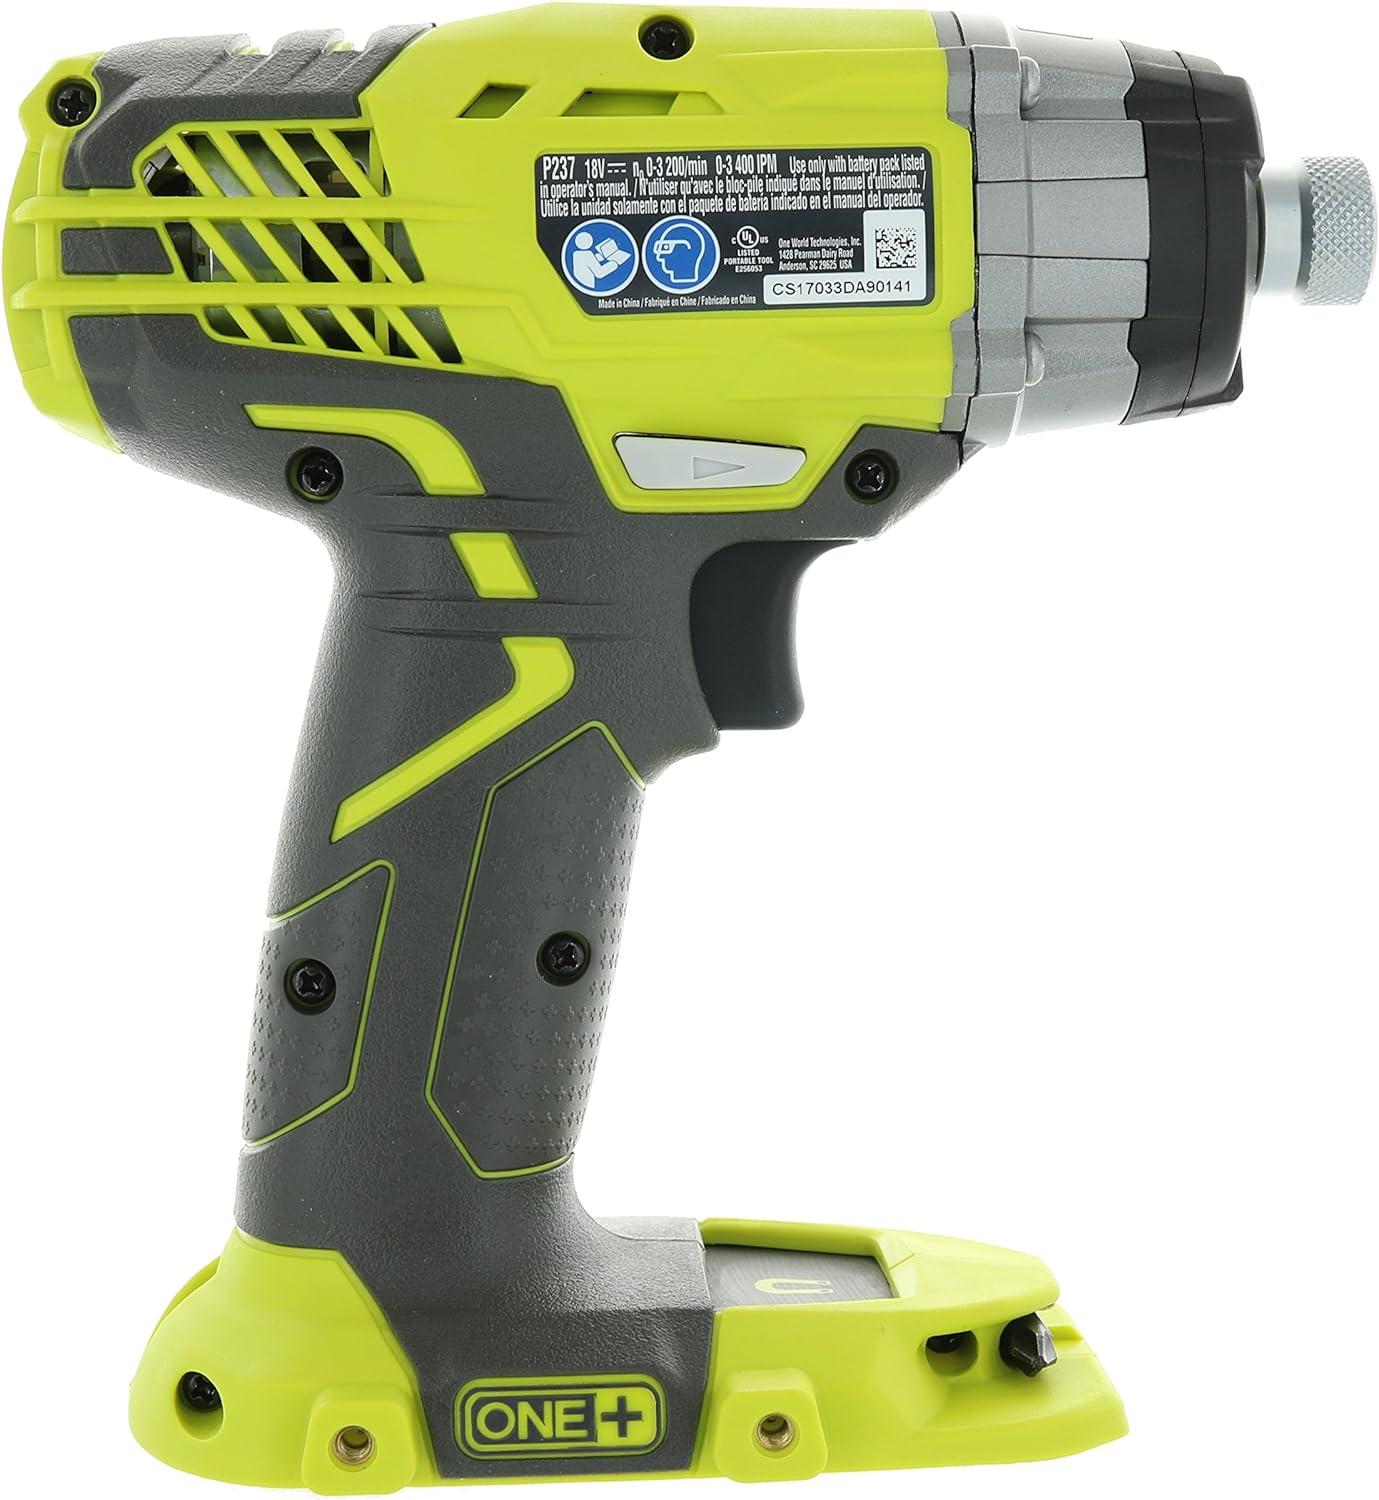 Ryobi P237 18V One+ Lithium Ion Cordless Multi Speed 1-1/4 Inch Keyless Chuck Impact Driver w/ Belt Clip and LED (Battery Not Included / Power Tool Only)